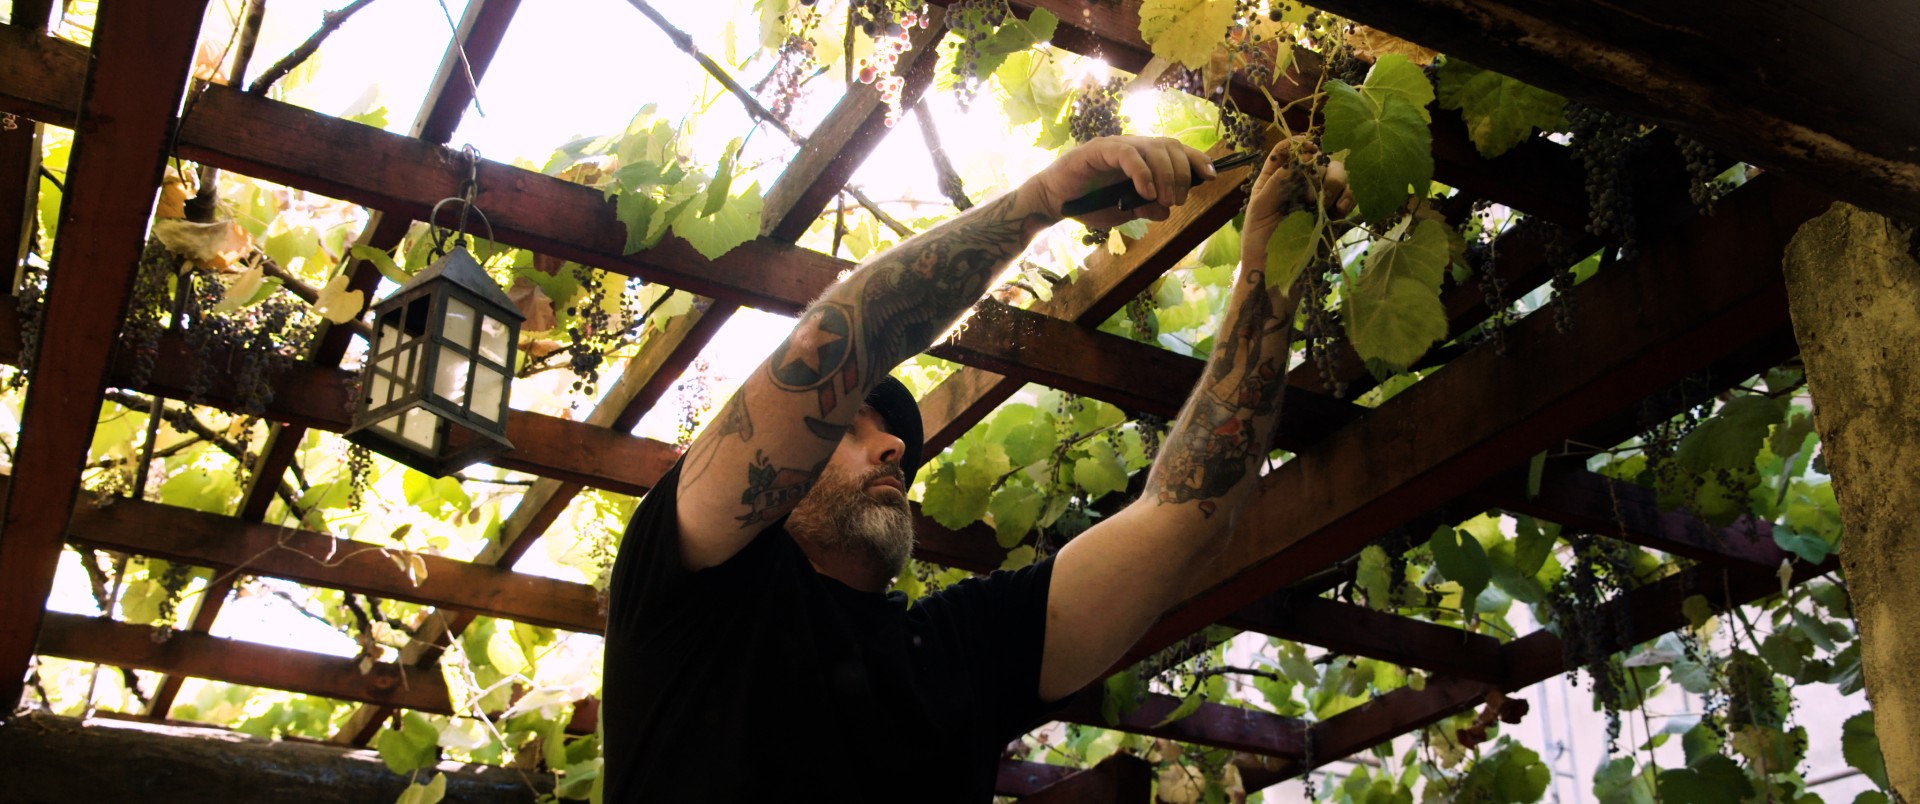 SOMM TV’s The Oldest Vine Put the L.A. Wine Scene Front and Center